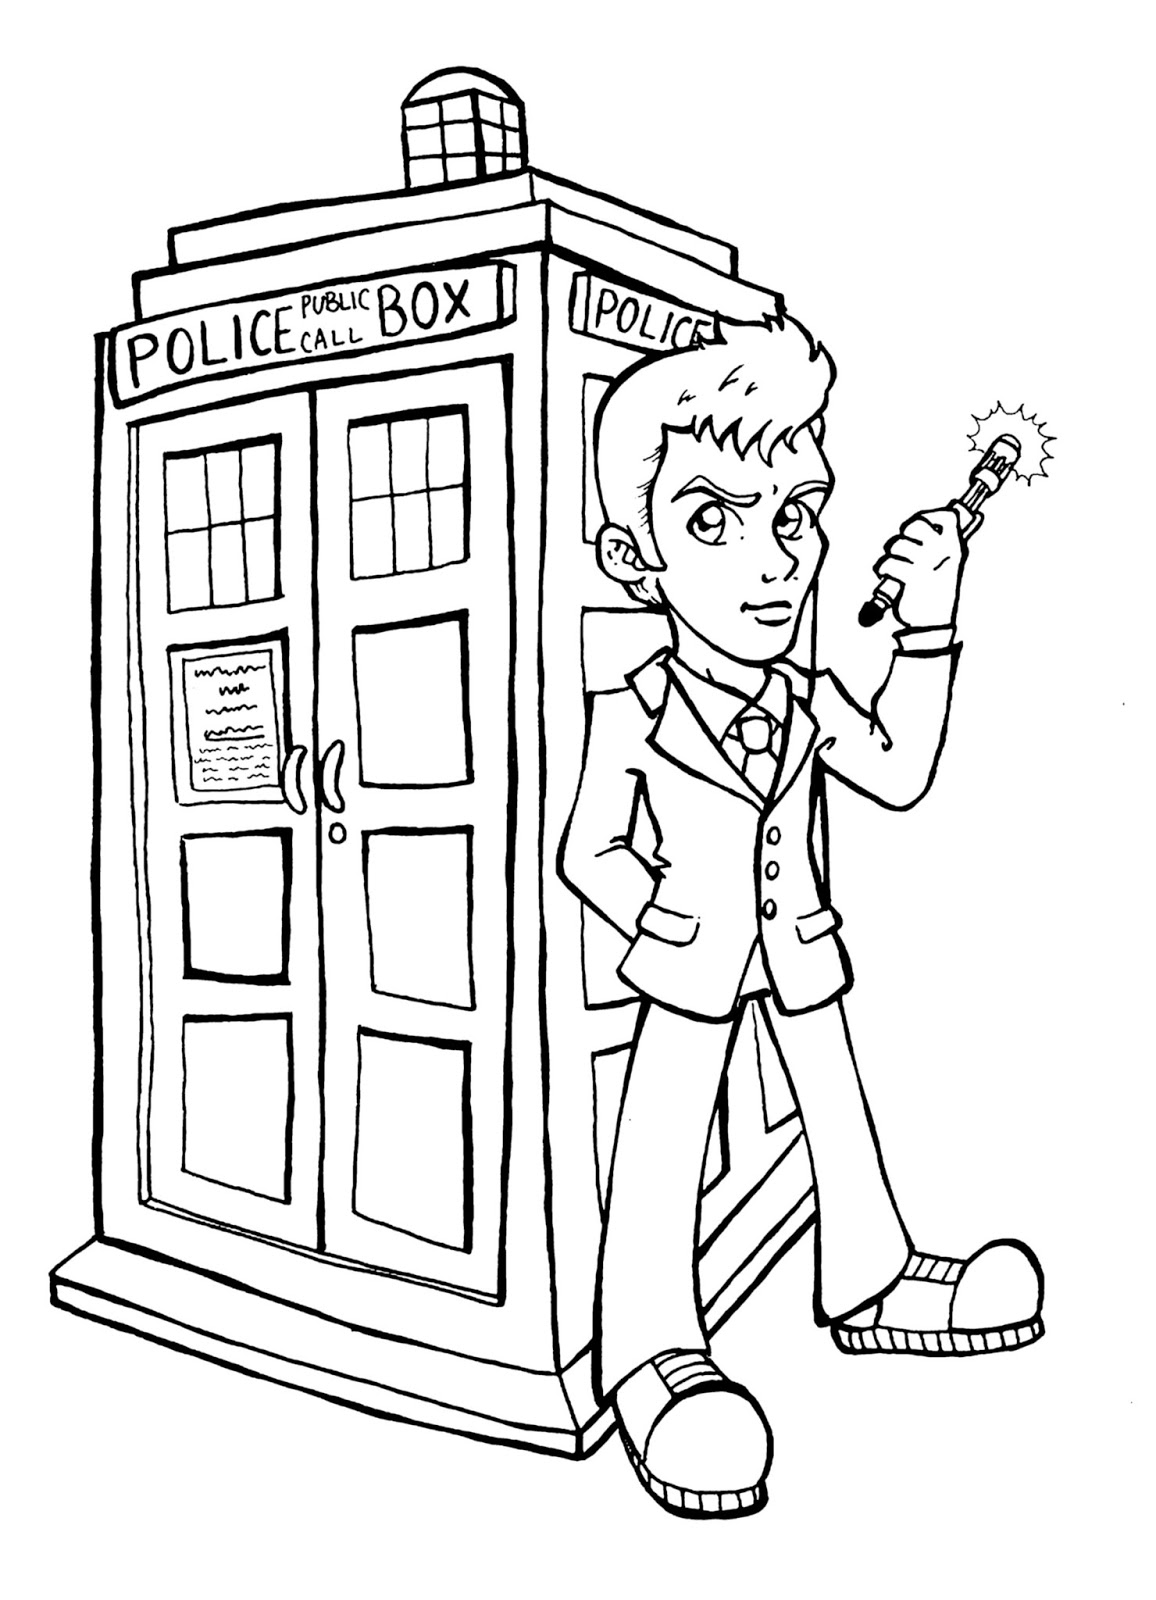 drawings-doctor-who-tv-shows-printable-coloring-pages